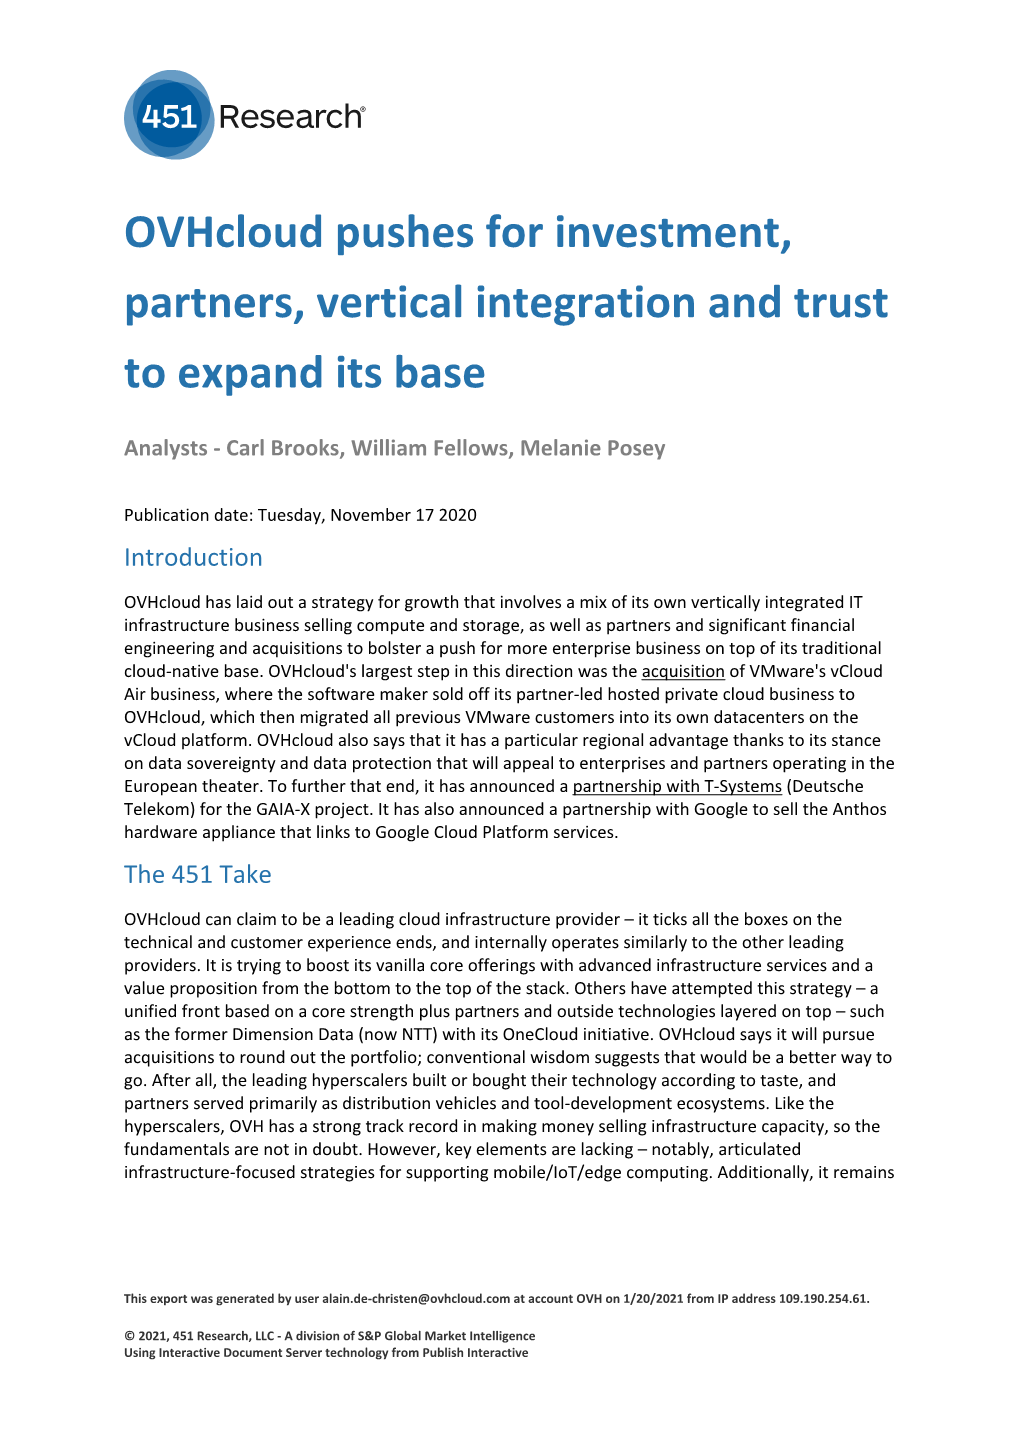 Ovhcloud Pushes for Investment, Partners, Vertical Integration and Trust to Expand Its Base